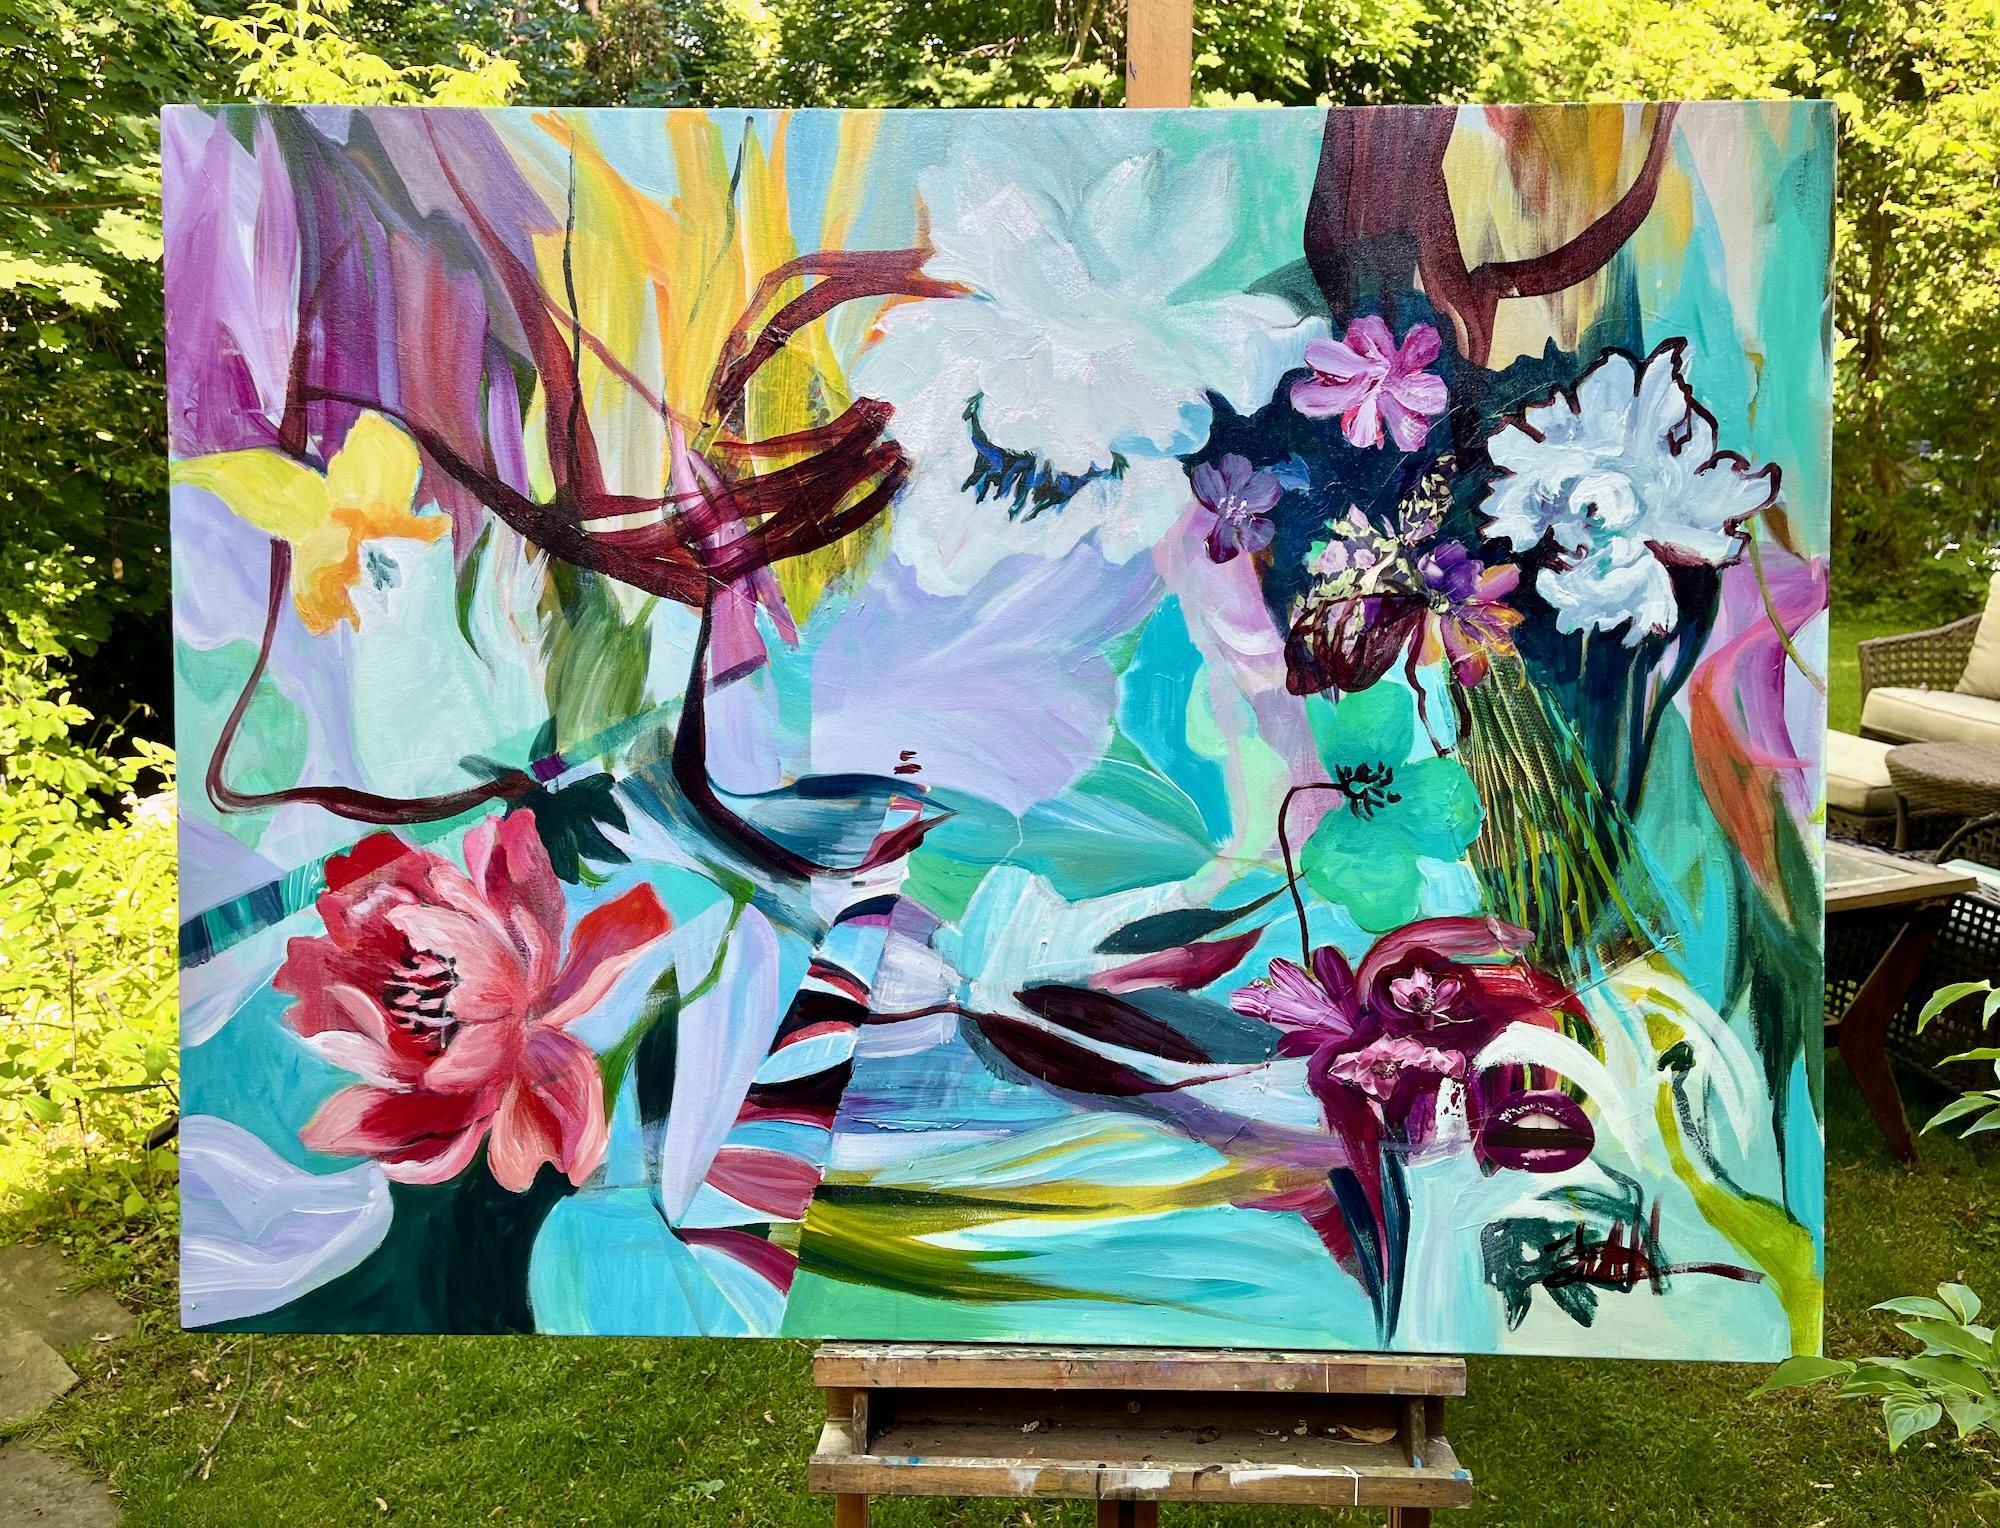 <p>Artist Comments<br>Artist Julia Hacker creates a whimsical painting inspired by nature and flora. Made in Julia's signature style, bright, festive colors and dynamic composition dominate the work. Vibrant blooming flowers ebb and flow amidst